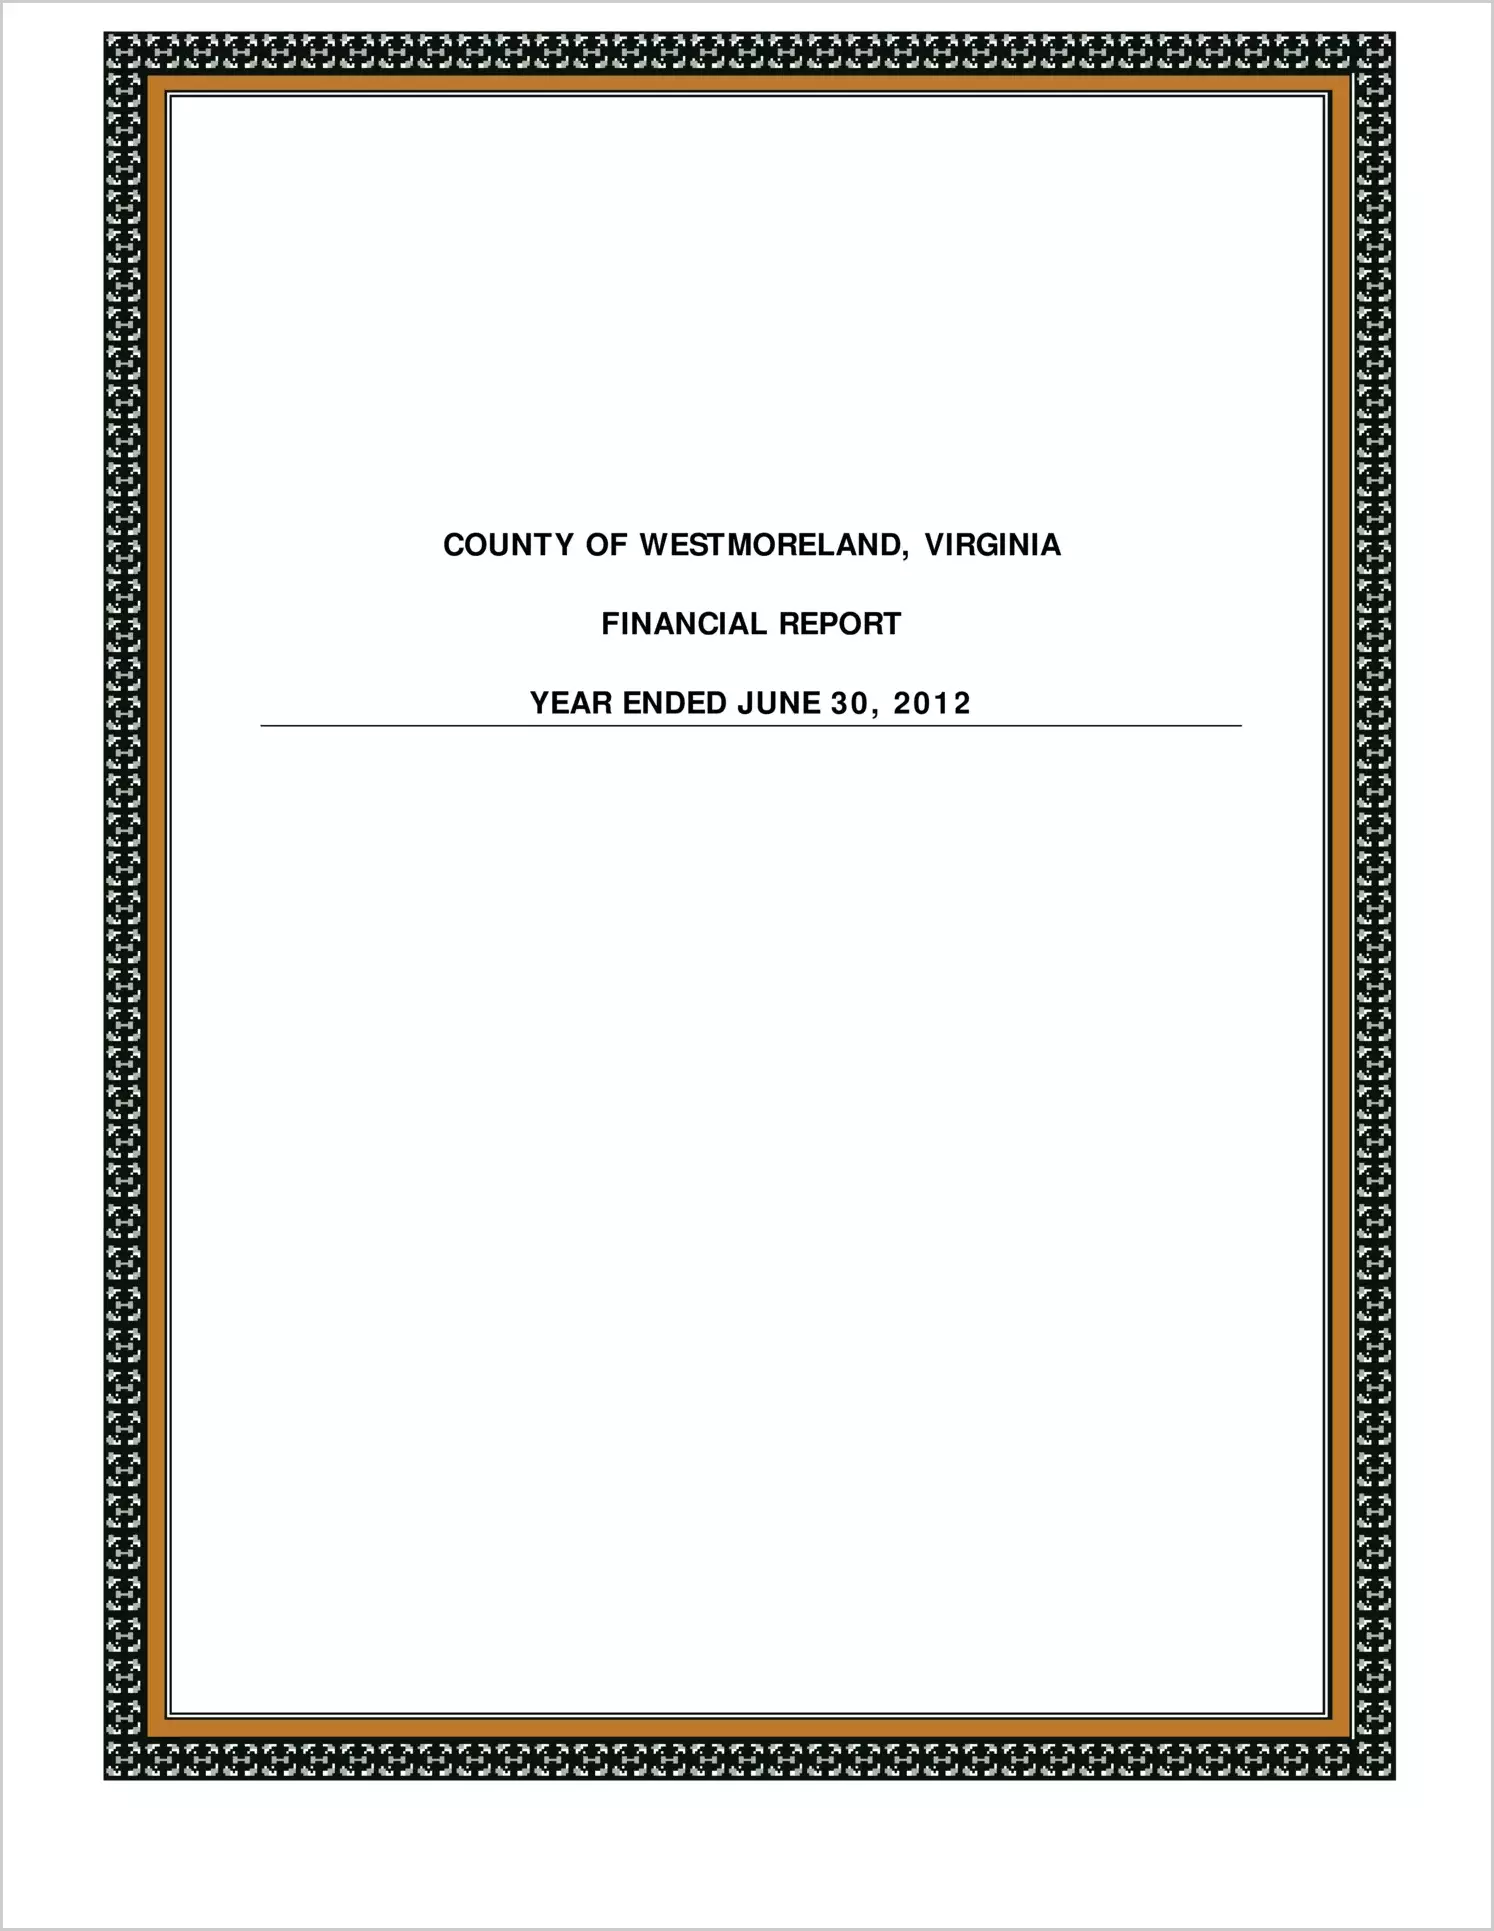 2012 Annual Financial Report for County of Westmoreland